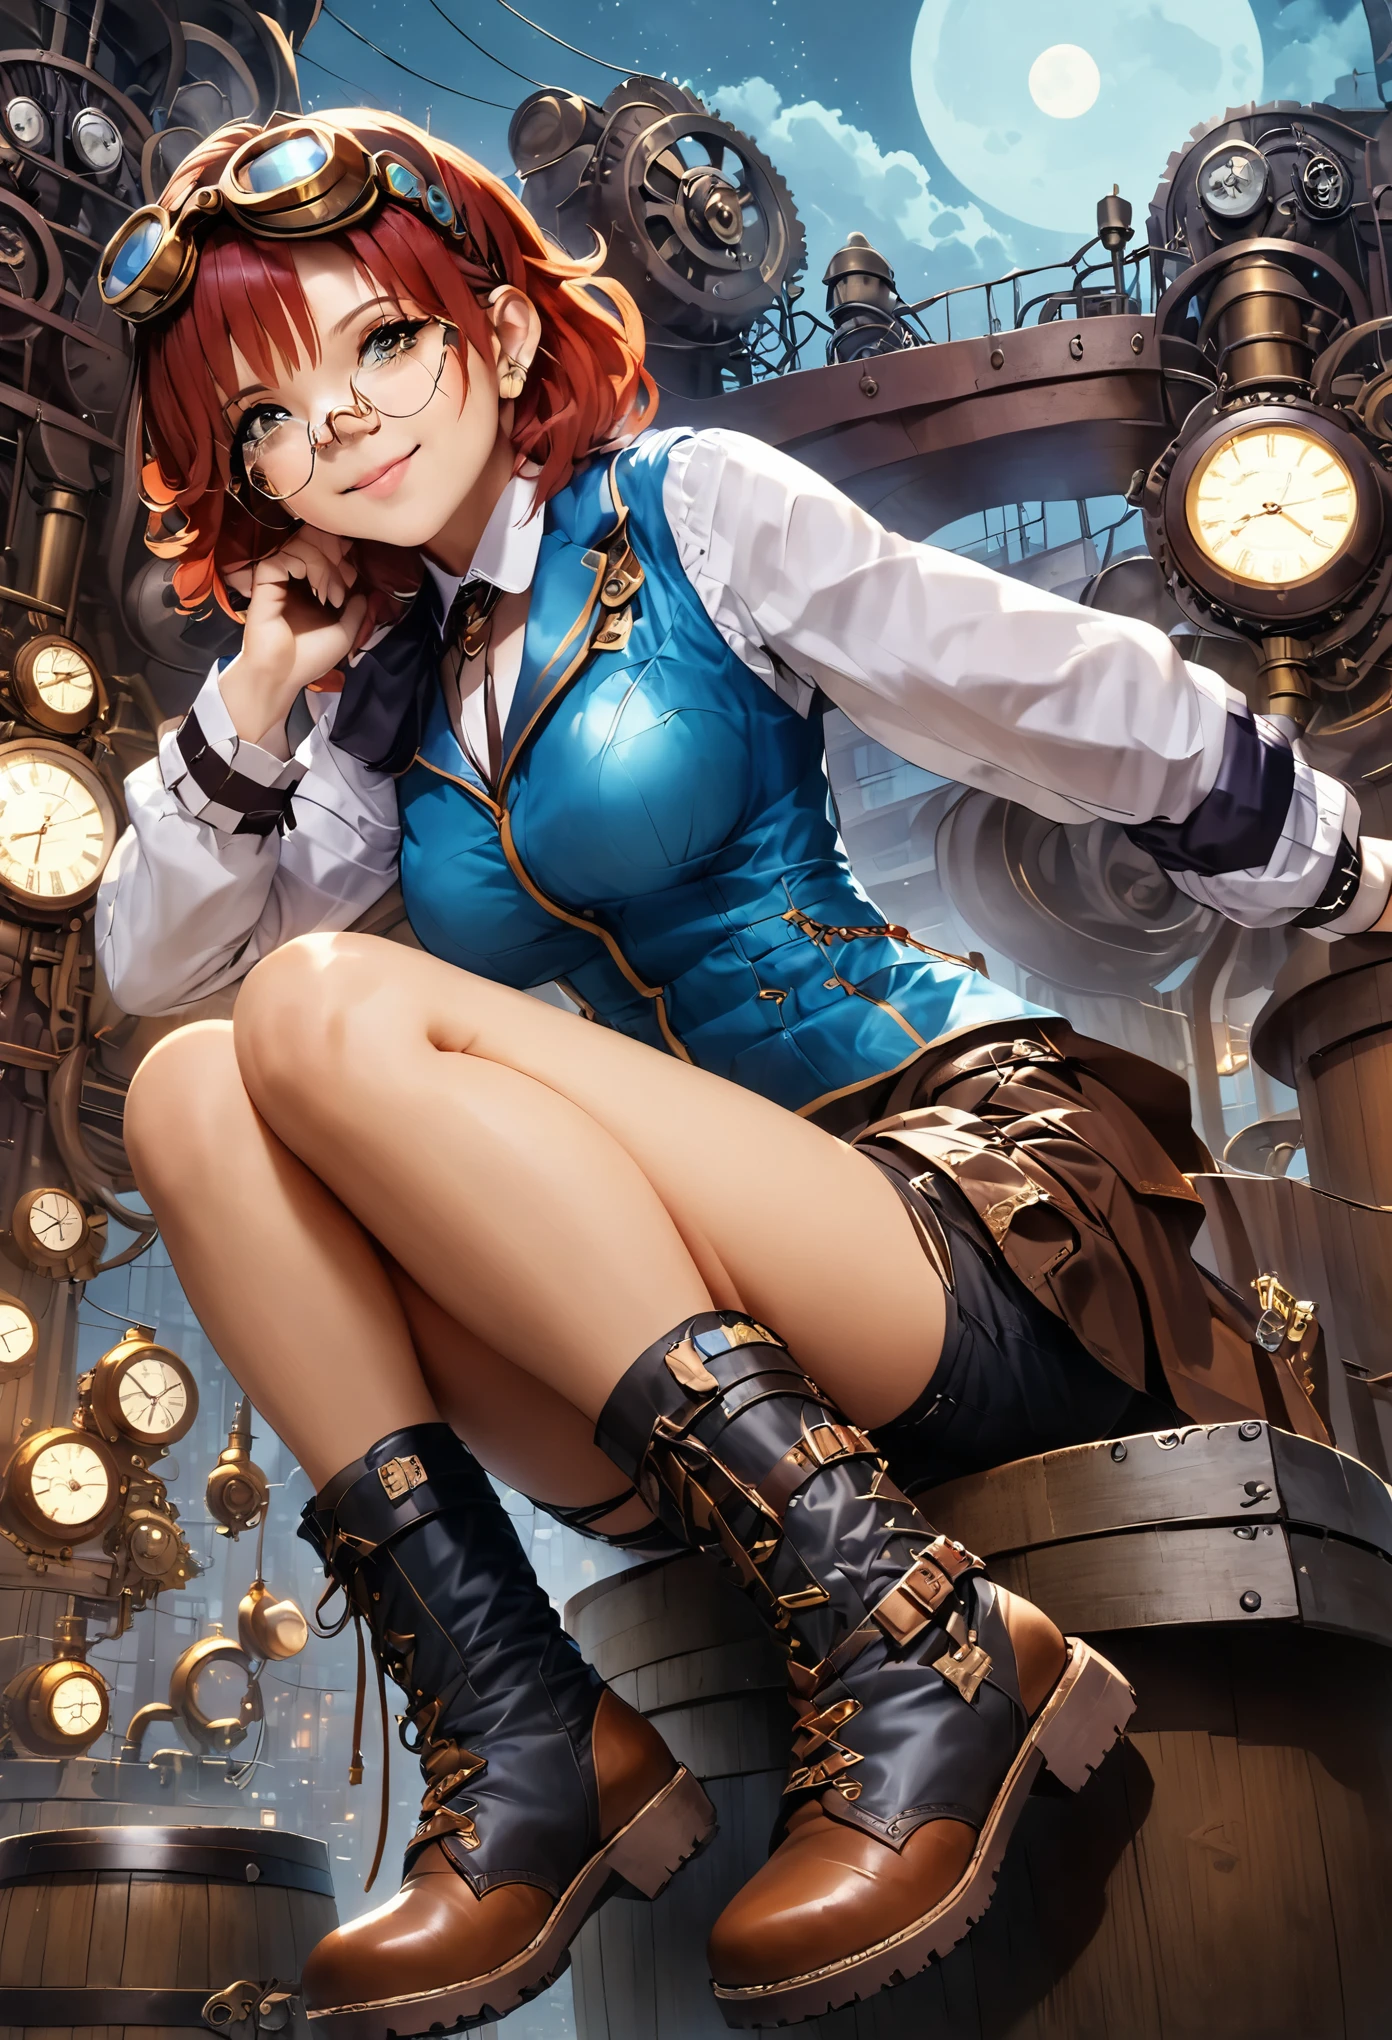 steampunk style　fine　beautiful girl　goggles　back alley　sitting on the barrel　Small brim　shorts　boots　A bright smile　night　a provocative atmosphere　redhead　short hair　Fantastic　Jacket　facing the front　photorealistic background　Clothes are brown　like leaning over here